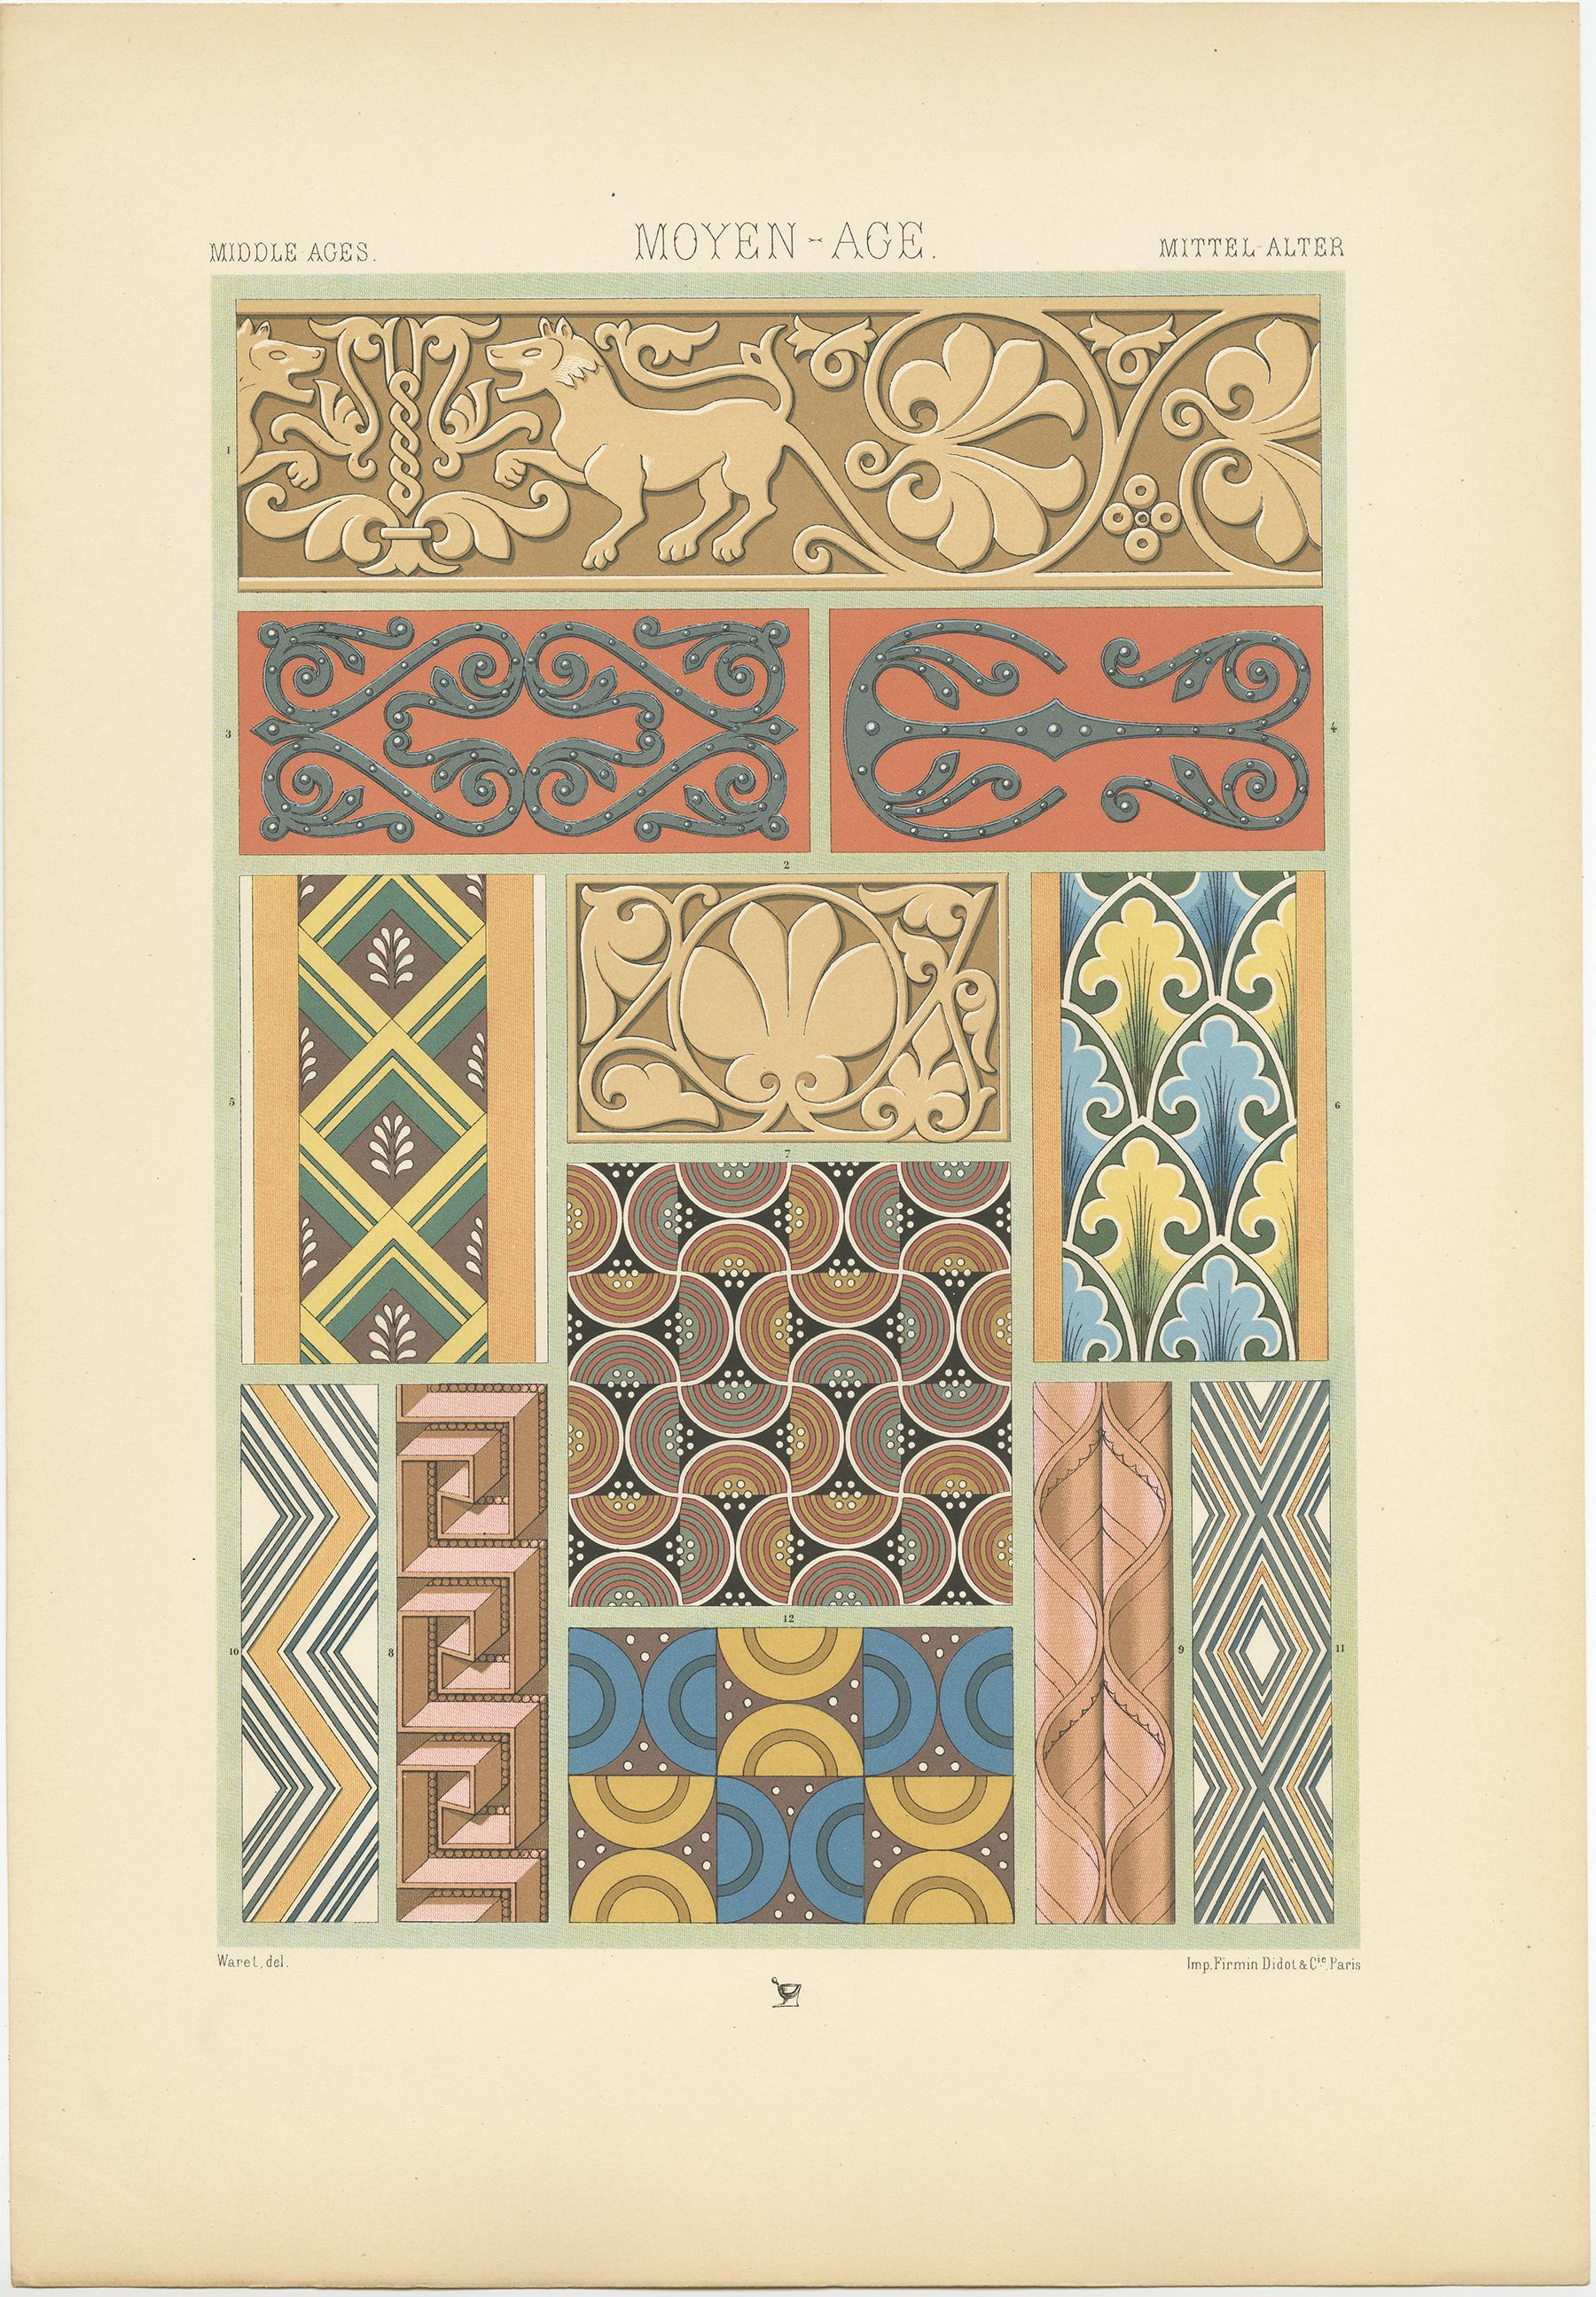 Antique print titled 'Middle Ages - Moyen Age - Mittel Alter'. Chromolithograph of Bas-Reliefs, ironwork and painting, France, 11th-14th centuries
ornaments. This print originates from 'l'Ornement Polychrome' by Auguste Racinet. Published, circa